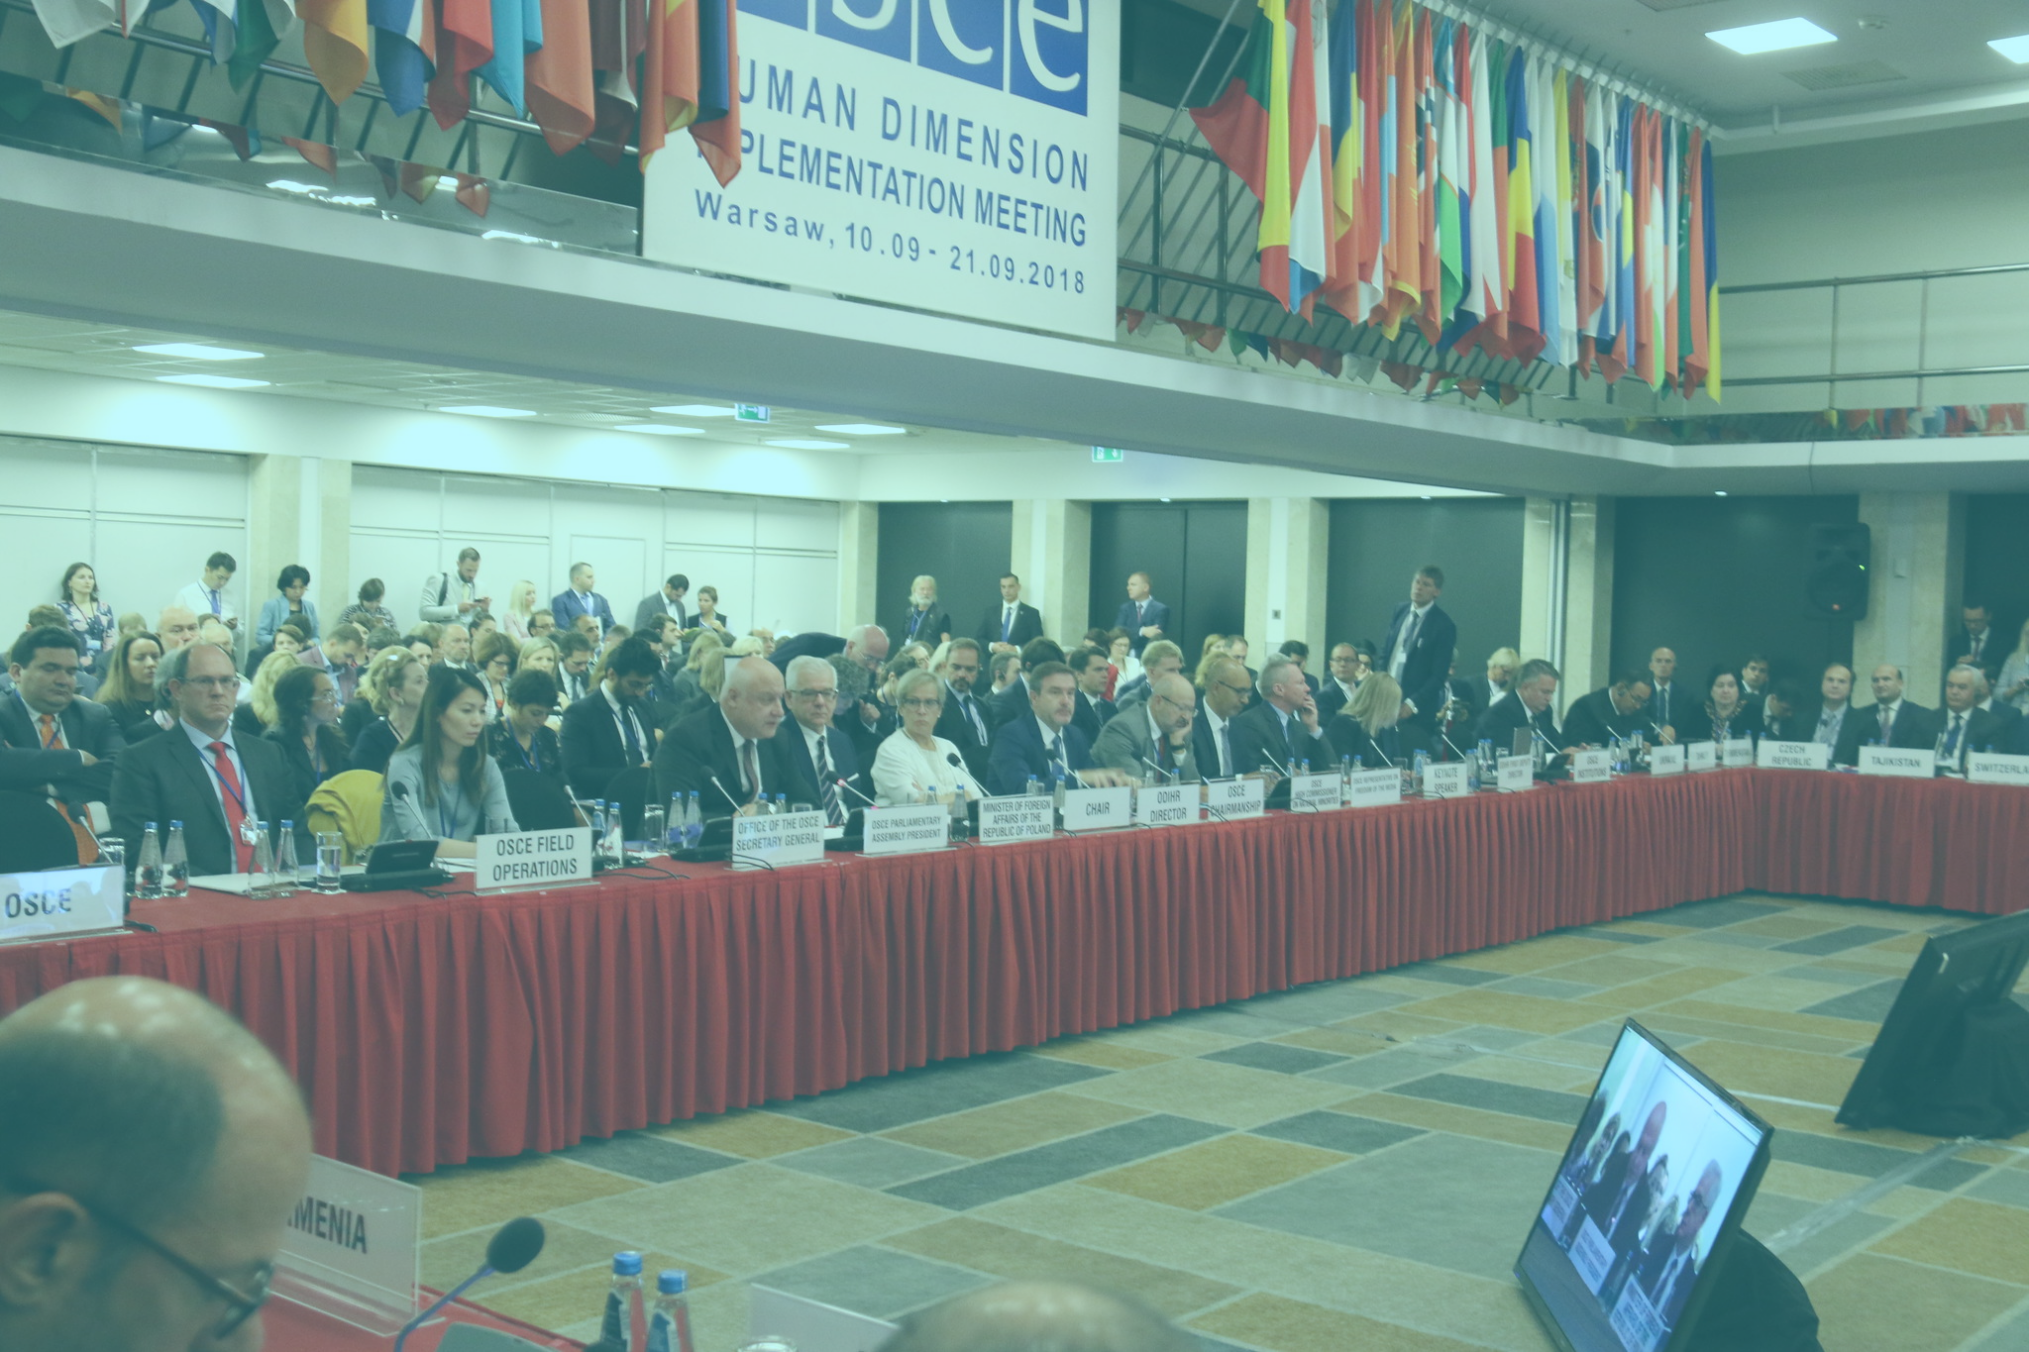 Photo: "George Tsereteli addresses the OSCE Office for Democratic Institutions and Human Rights HDIM in Warsaw, 10 Sept. 2018", by OSCE Parliamentary Assembly licensed under CC BY-SA 2.0. Hue modified from the original